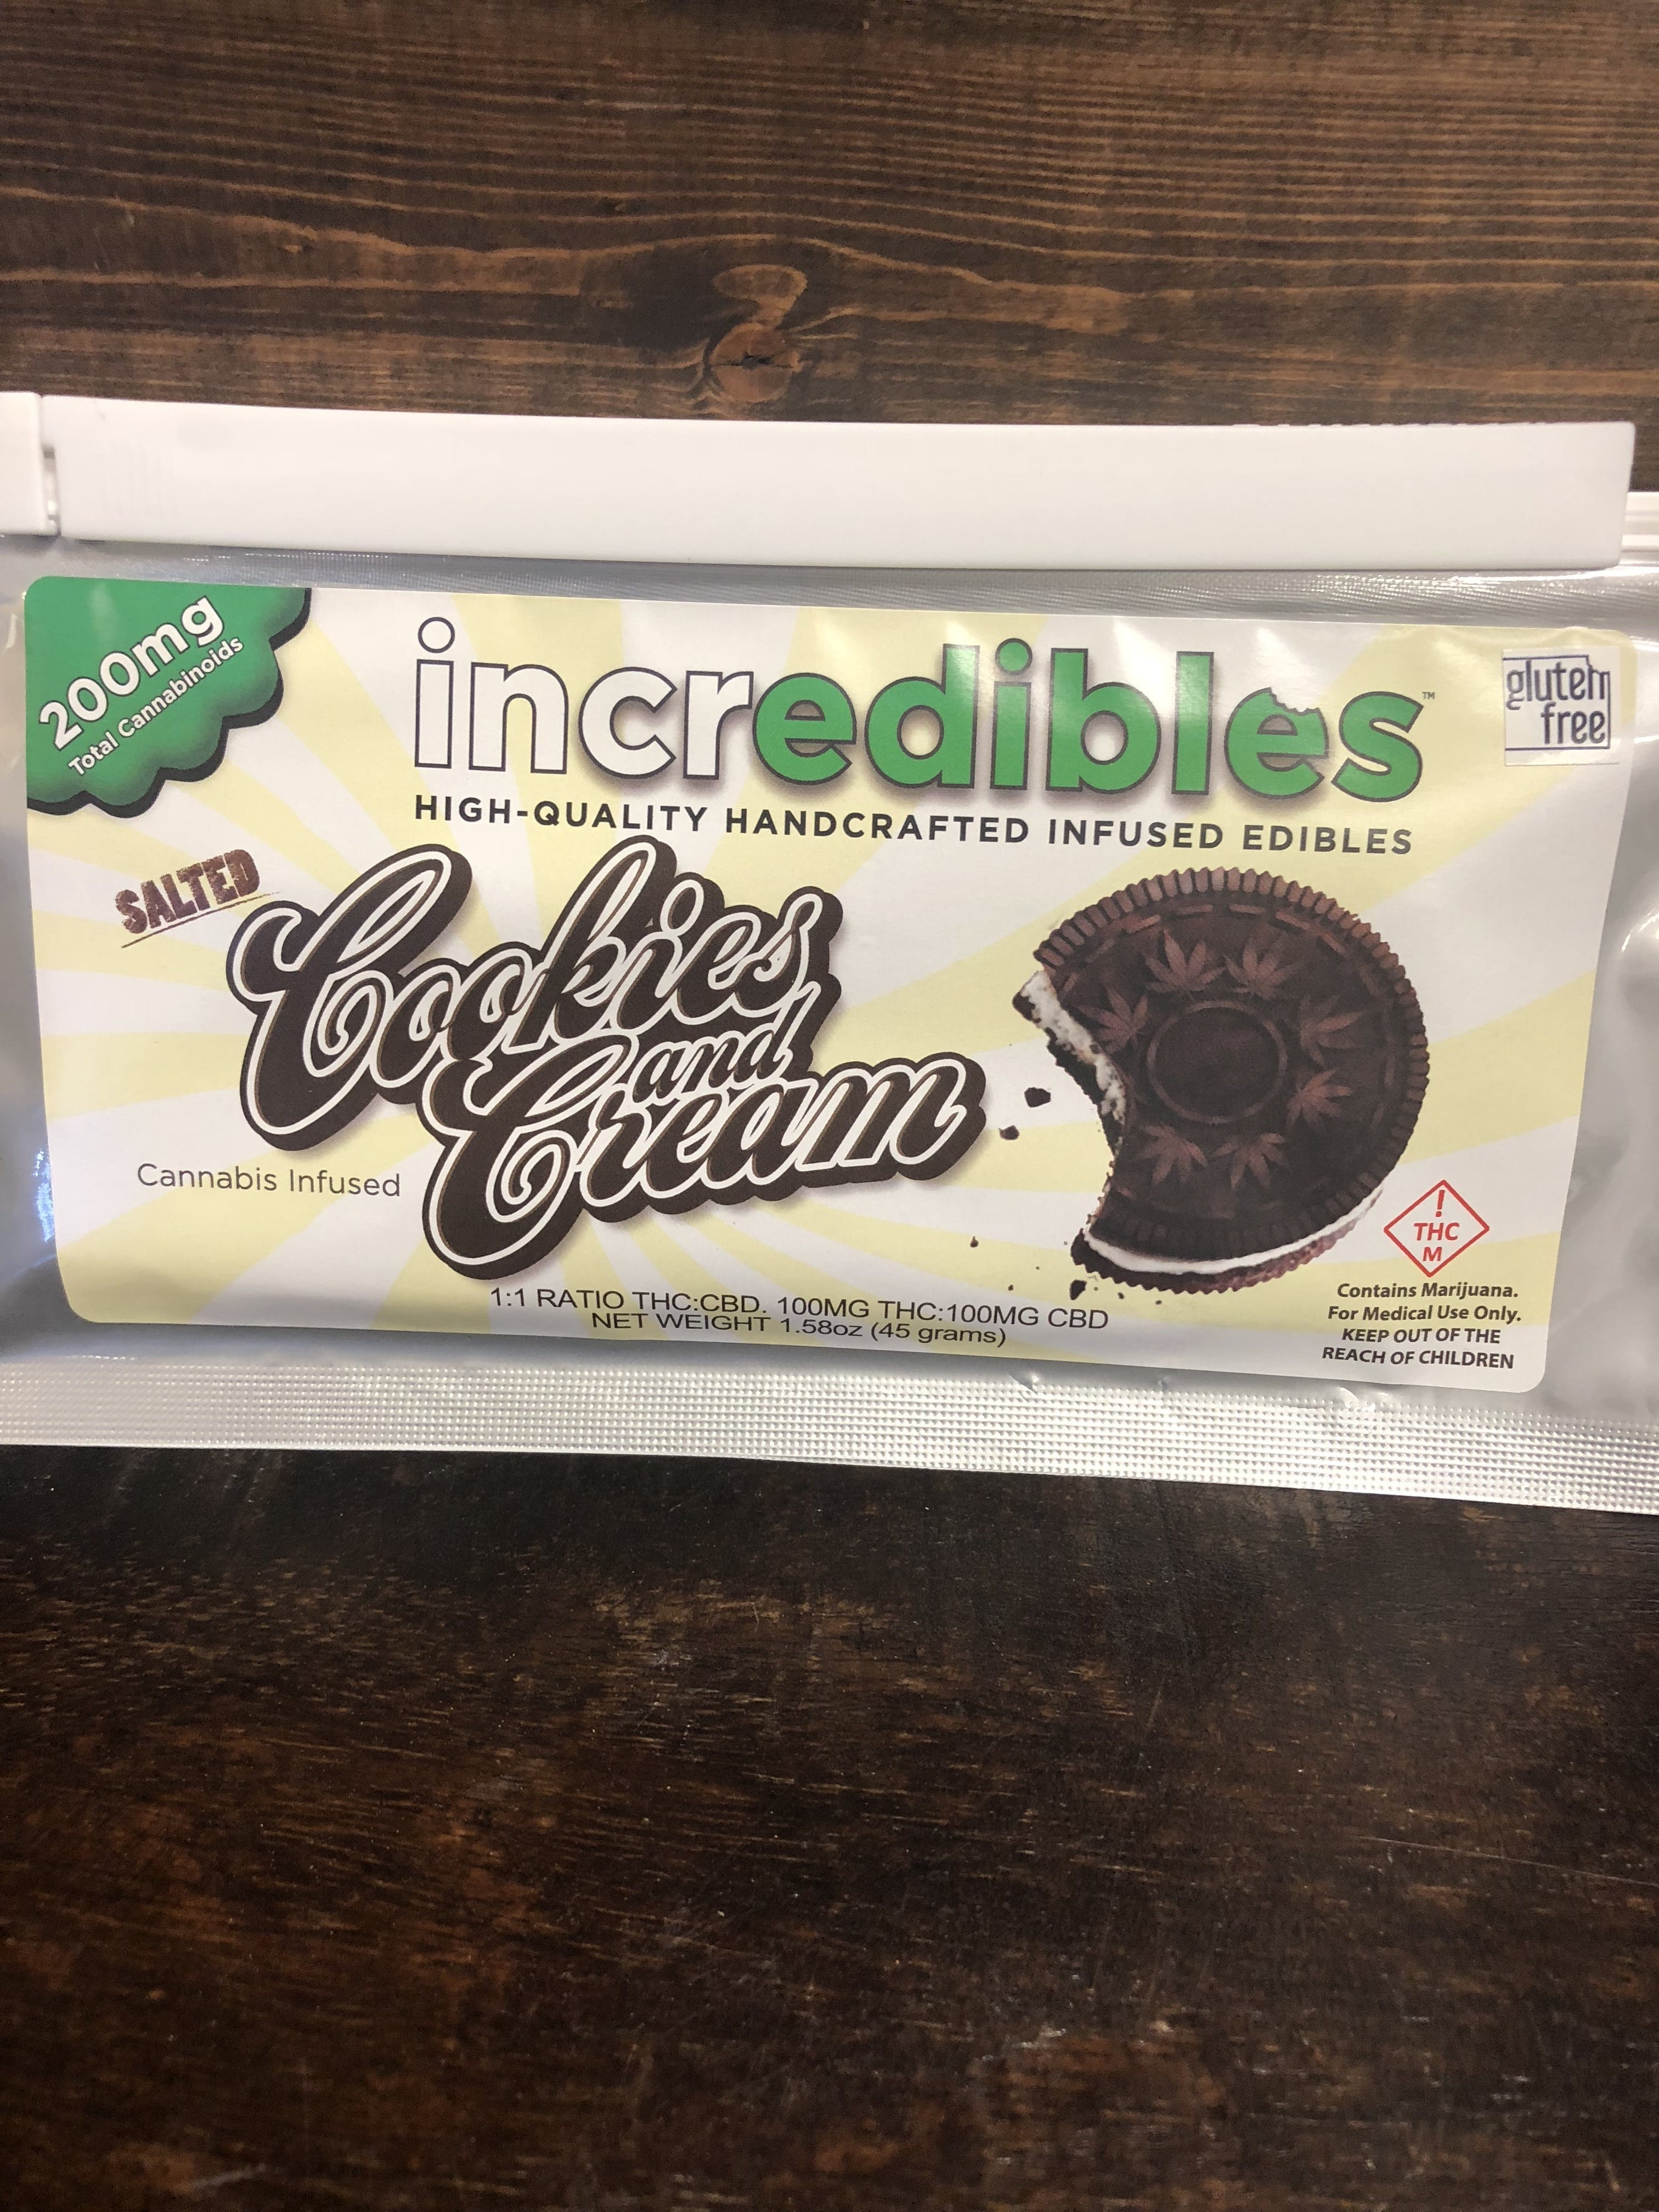 edible-med-incredibles-salted-cookies-a-cream-200mg